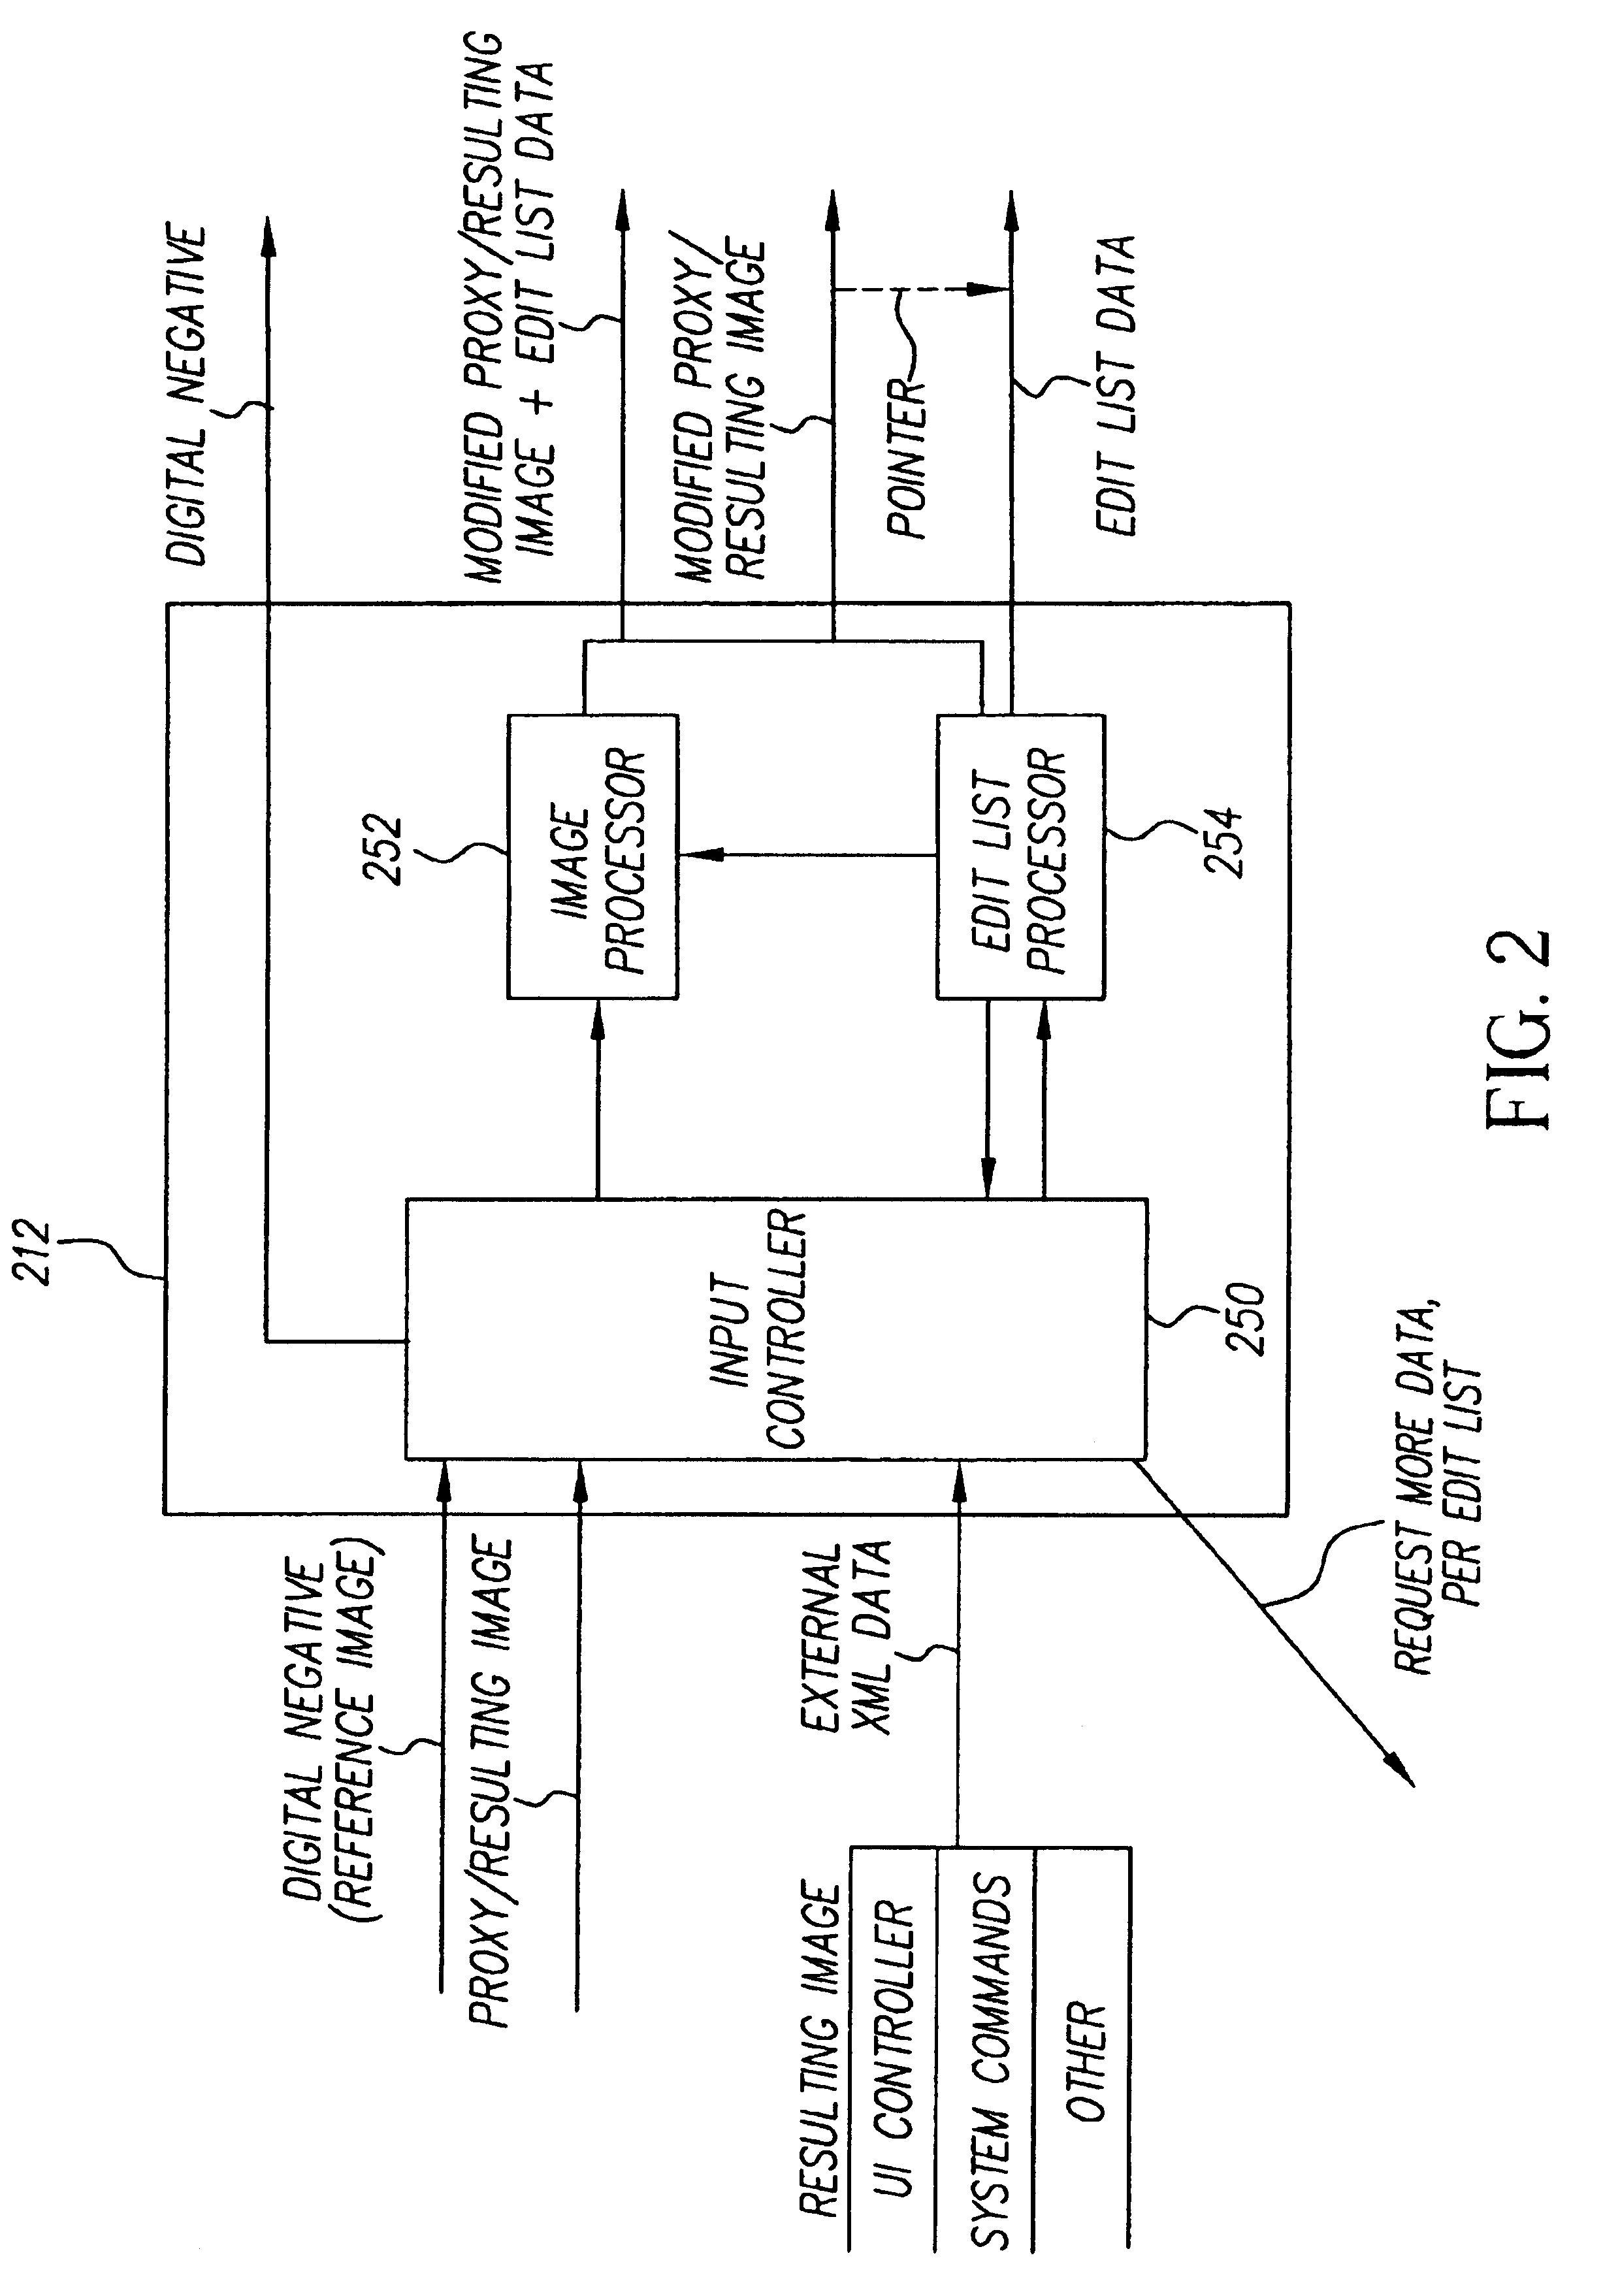 Method and apparatus that allows a low-resolution digital greeting card image or digital calendar image to contain a link to an associated original digital negative and edit list